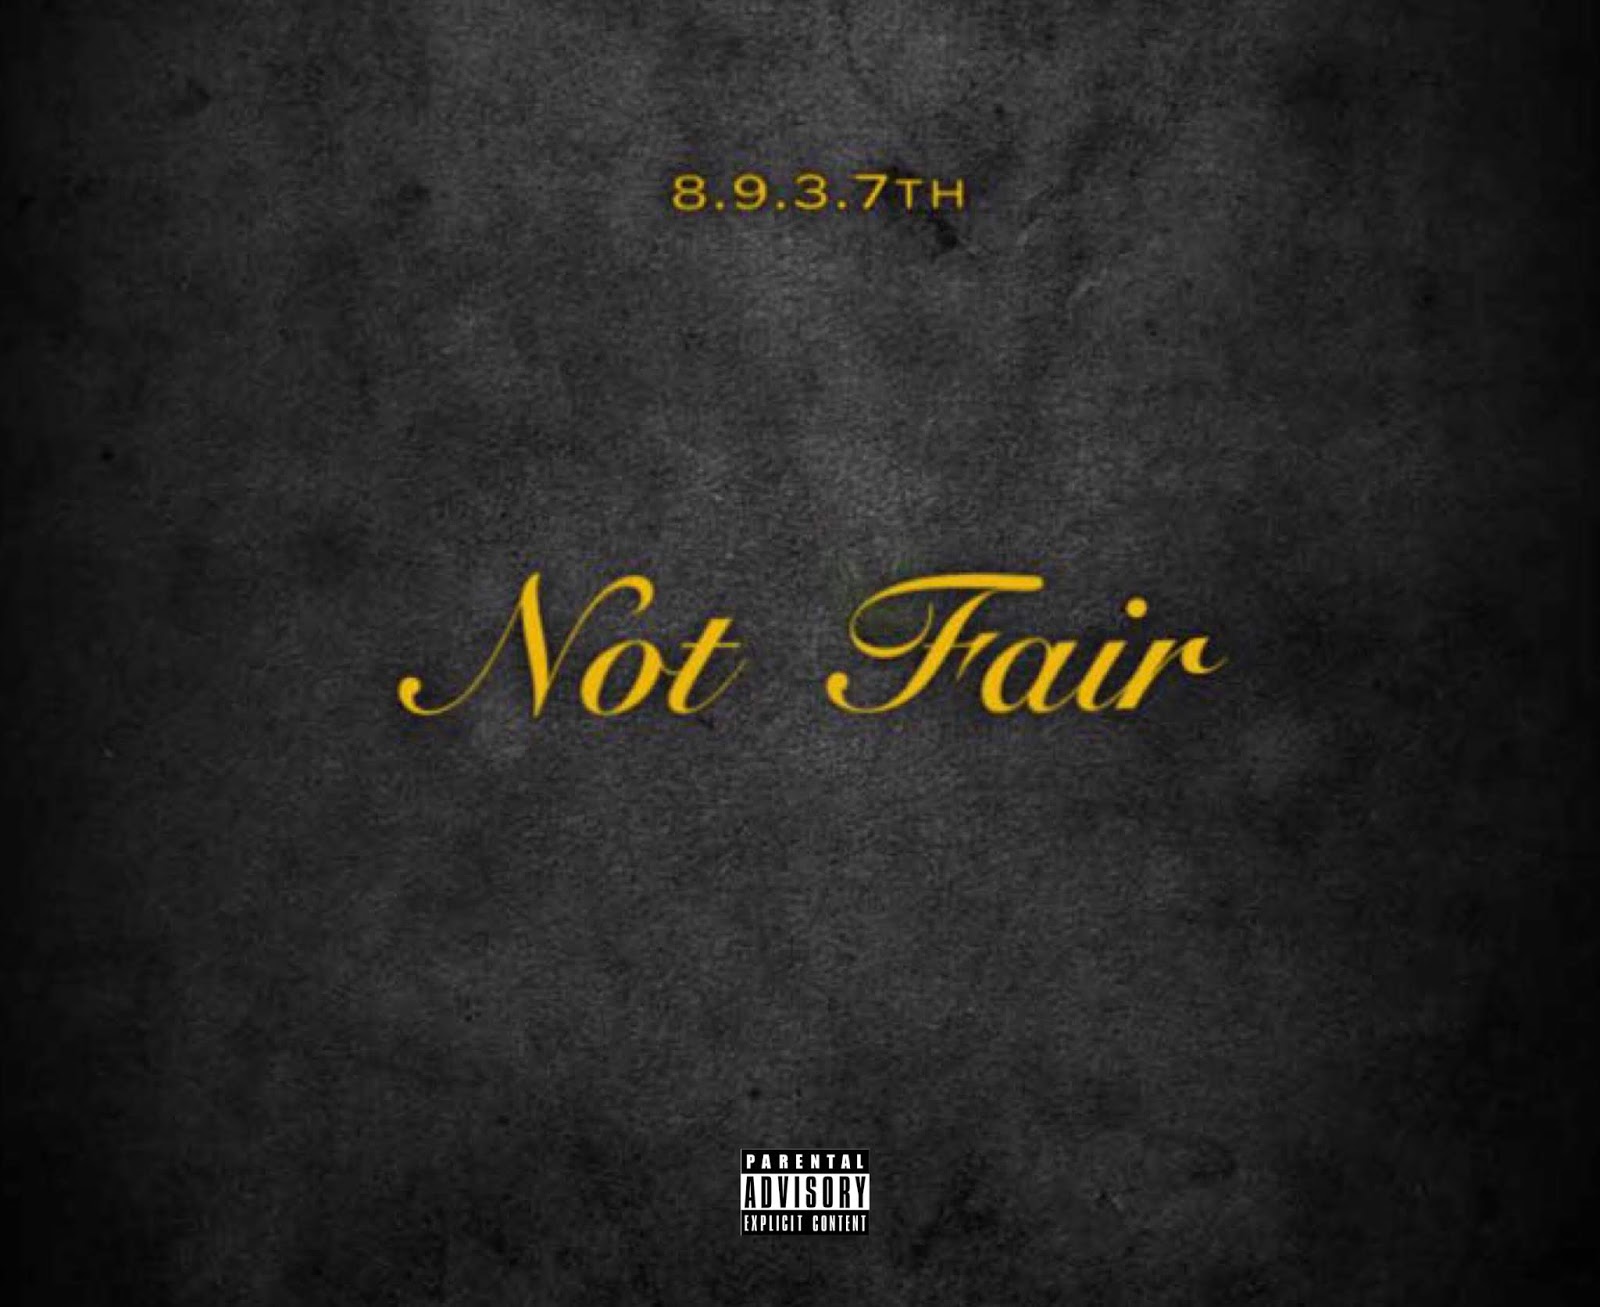 NYC HIPHOP>> 8.9.3.7th releases new-age song for the ladies “Not Fair ...